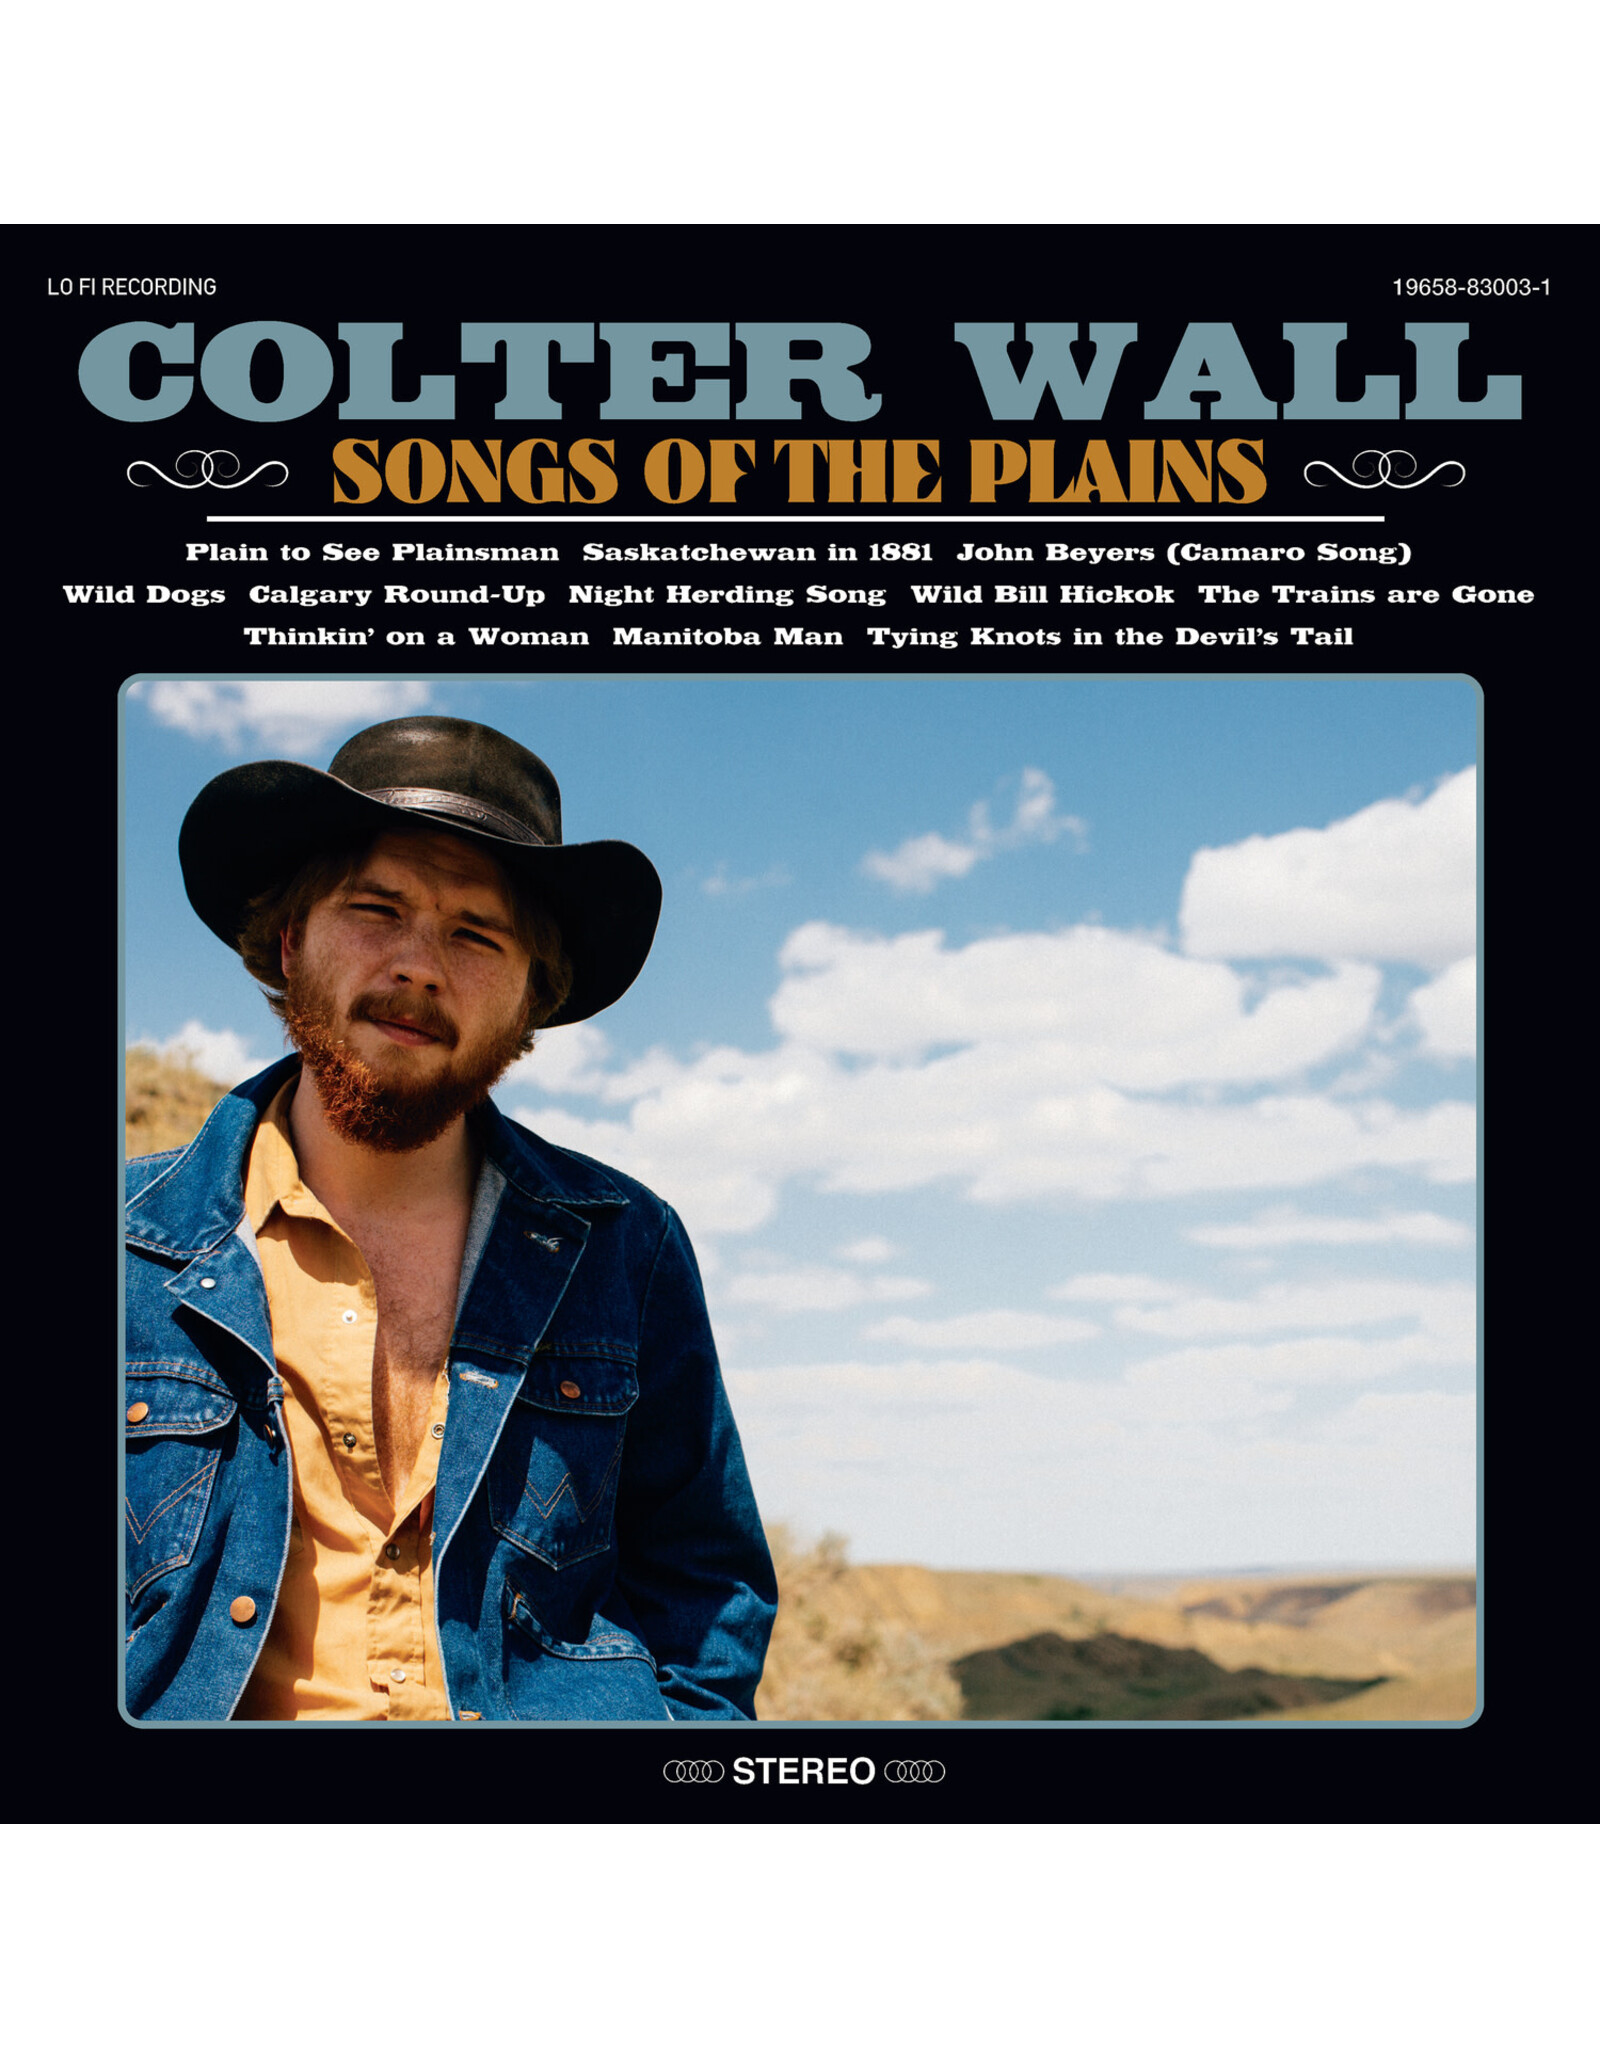 Colter Wall - Songs of the Plains (Red Vinyl)